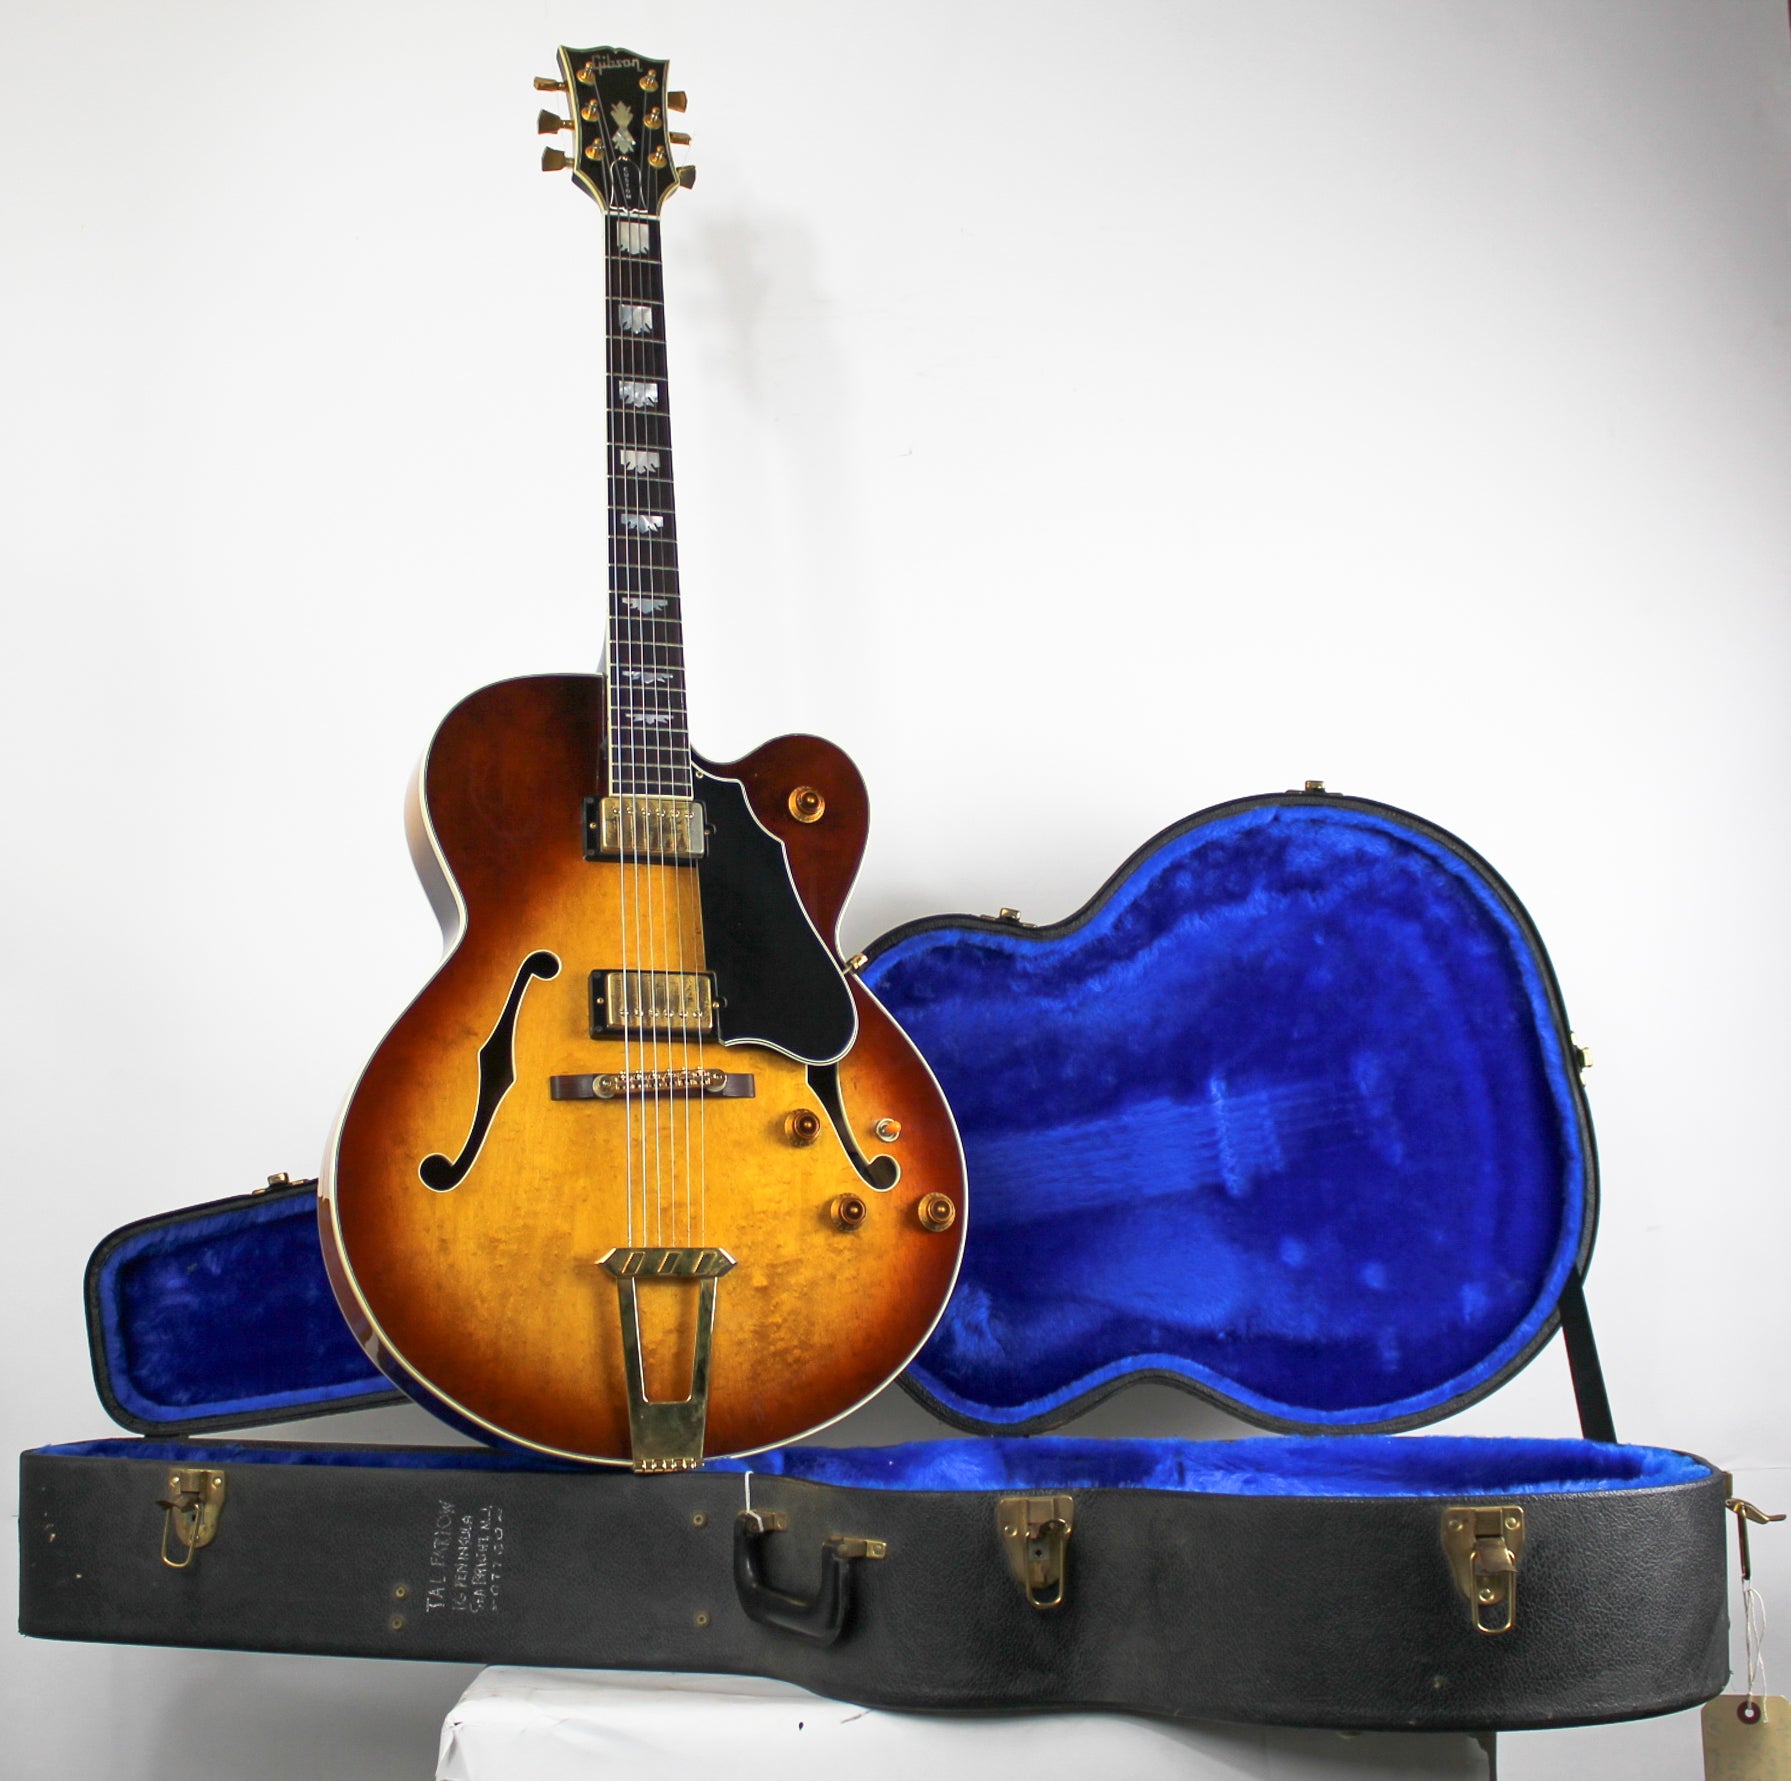 Gibson 1987 Viceroy Tobacco Sunburst - Personally Owned by Tal Farlow